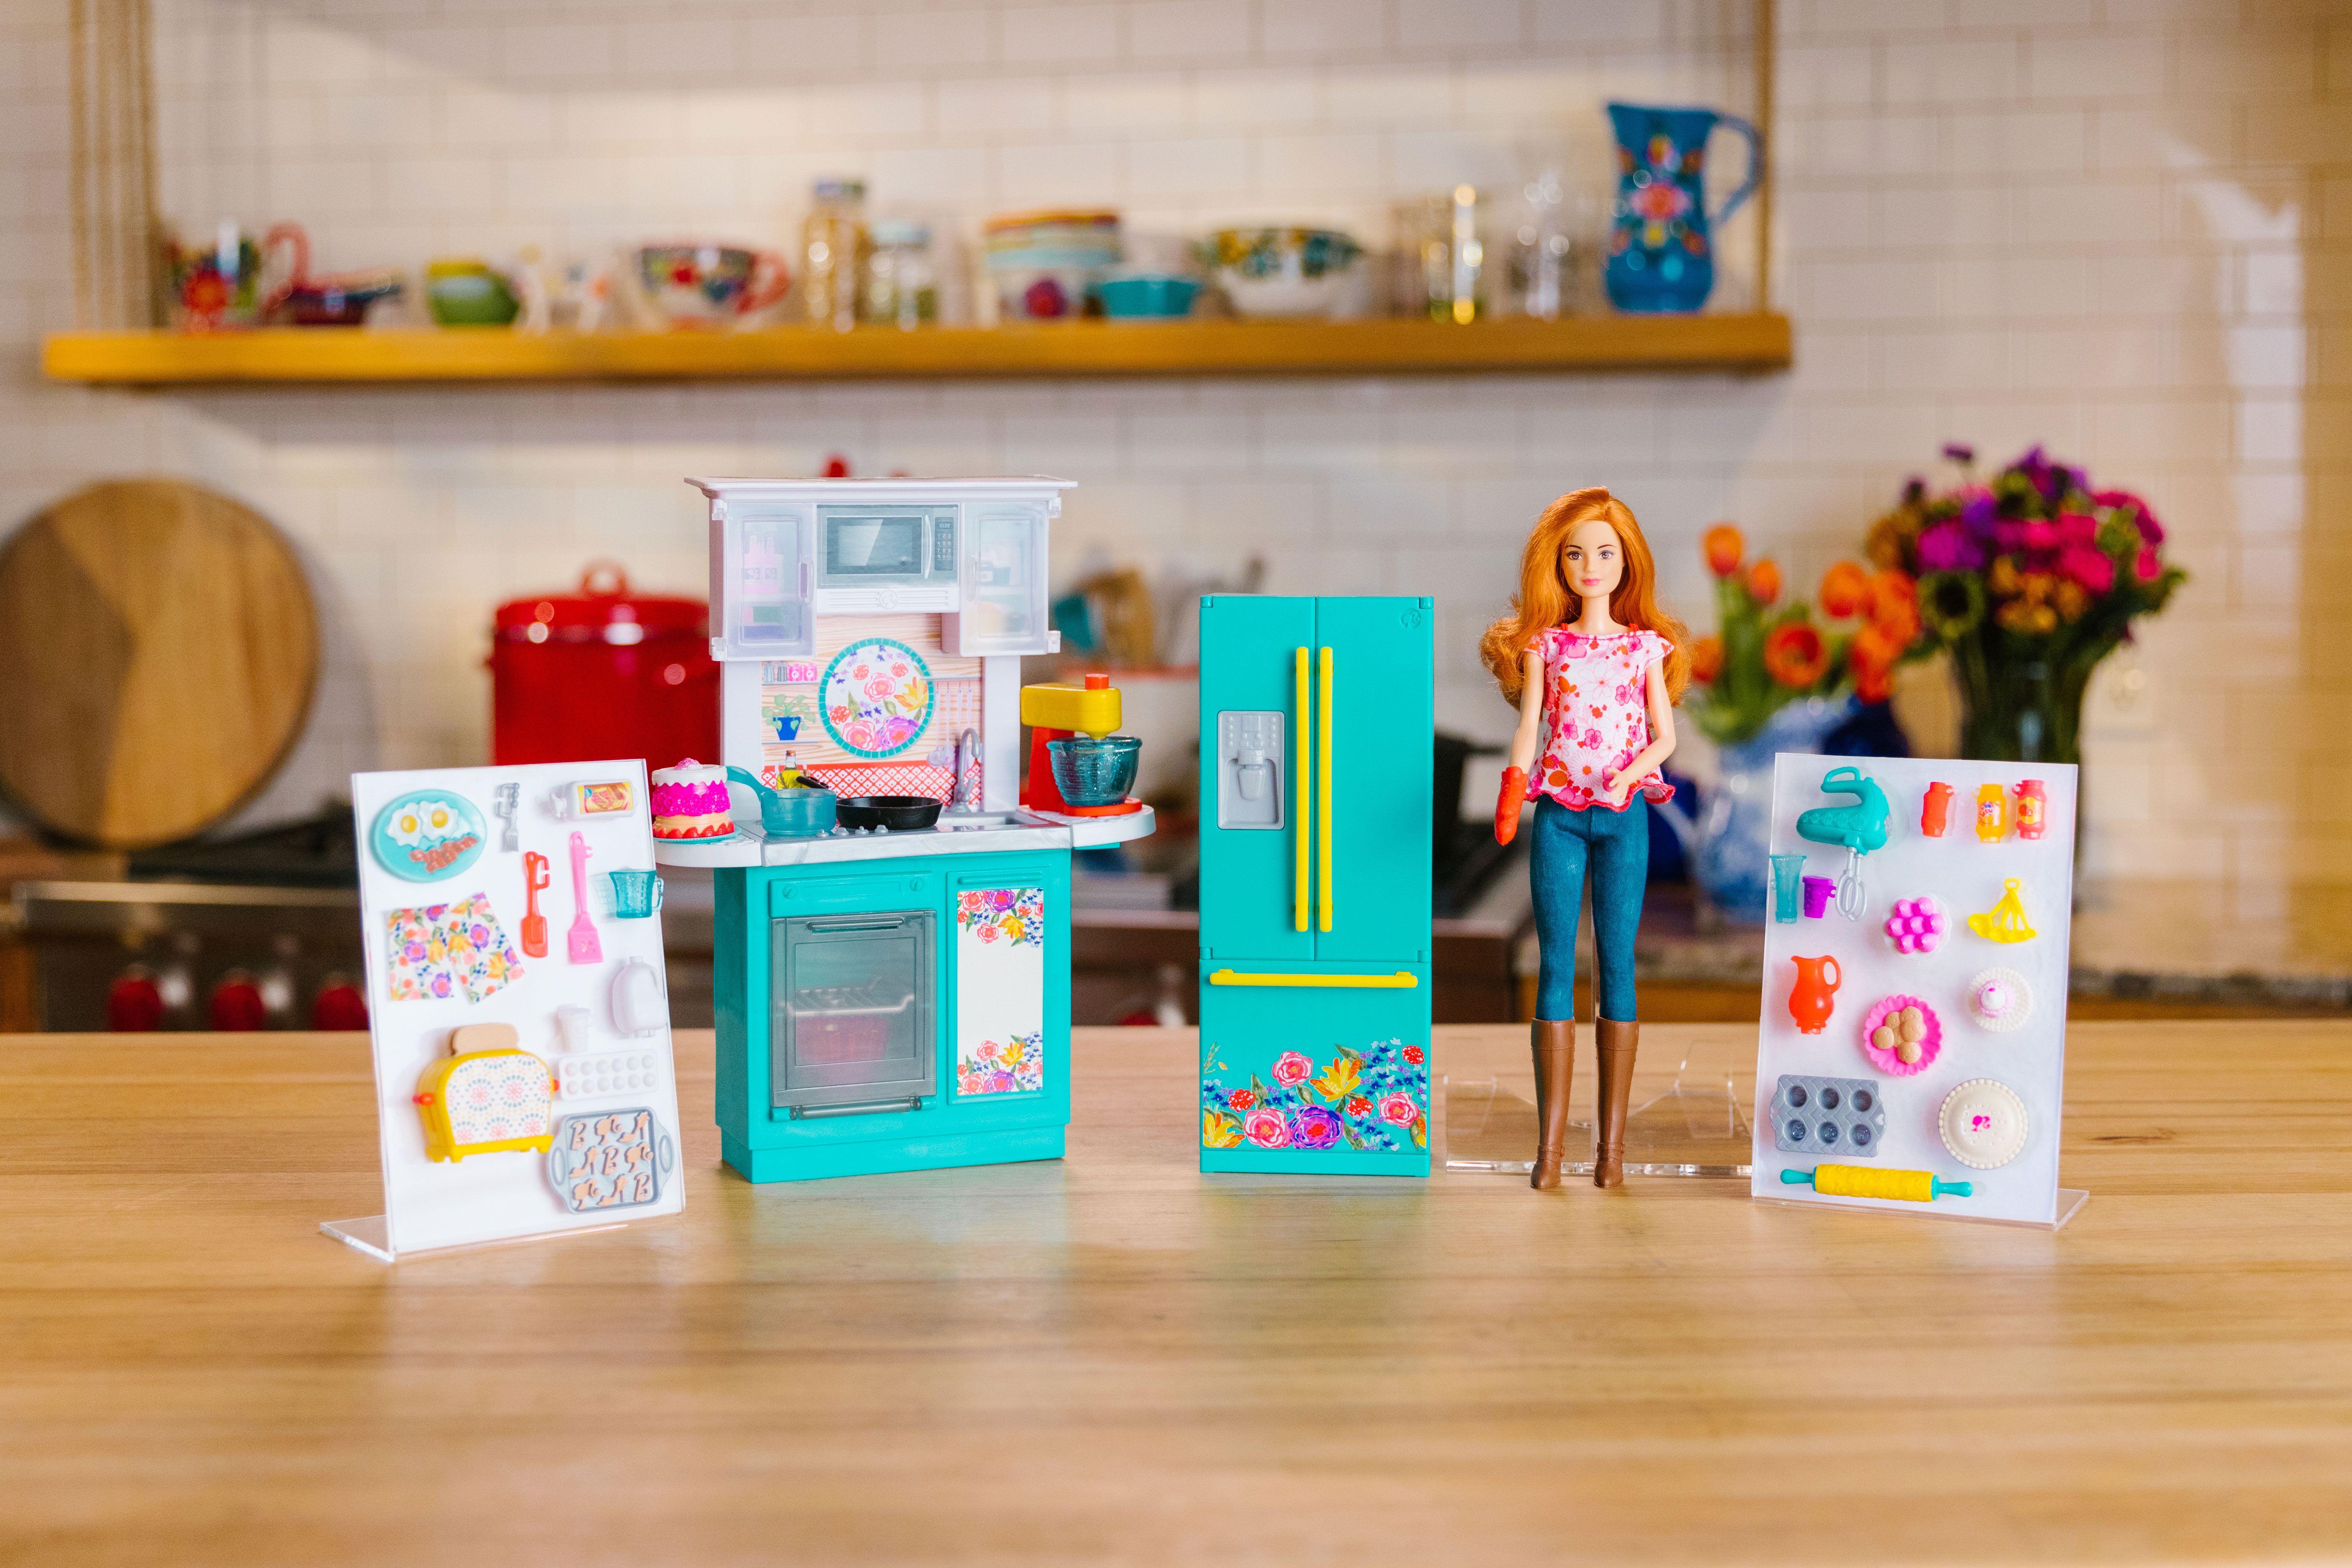 Barbie Pioneer Woman Kitchen Set Teal Flowers Refrigerator Stove and  Accessories